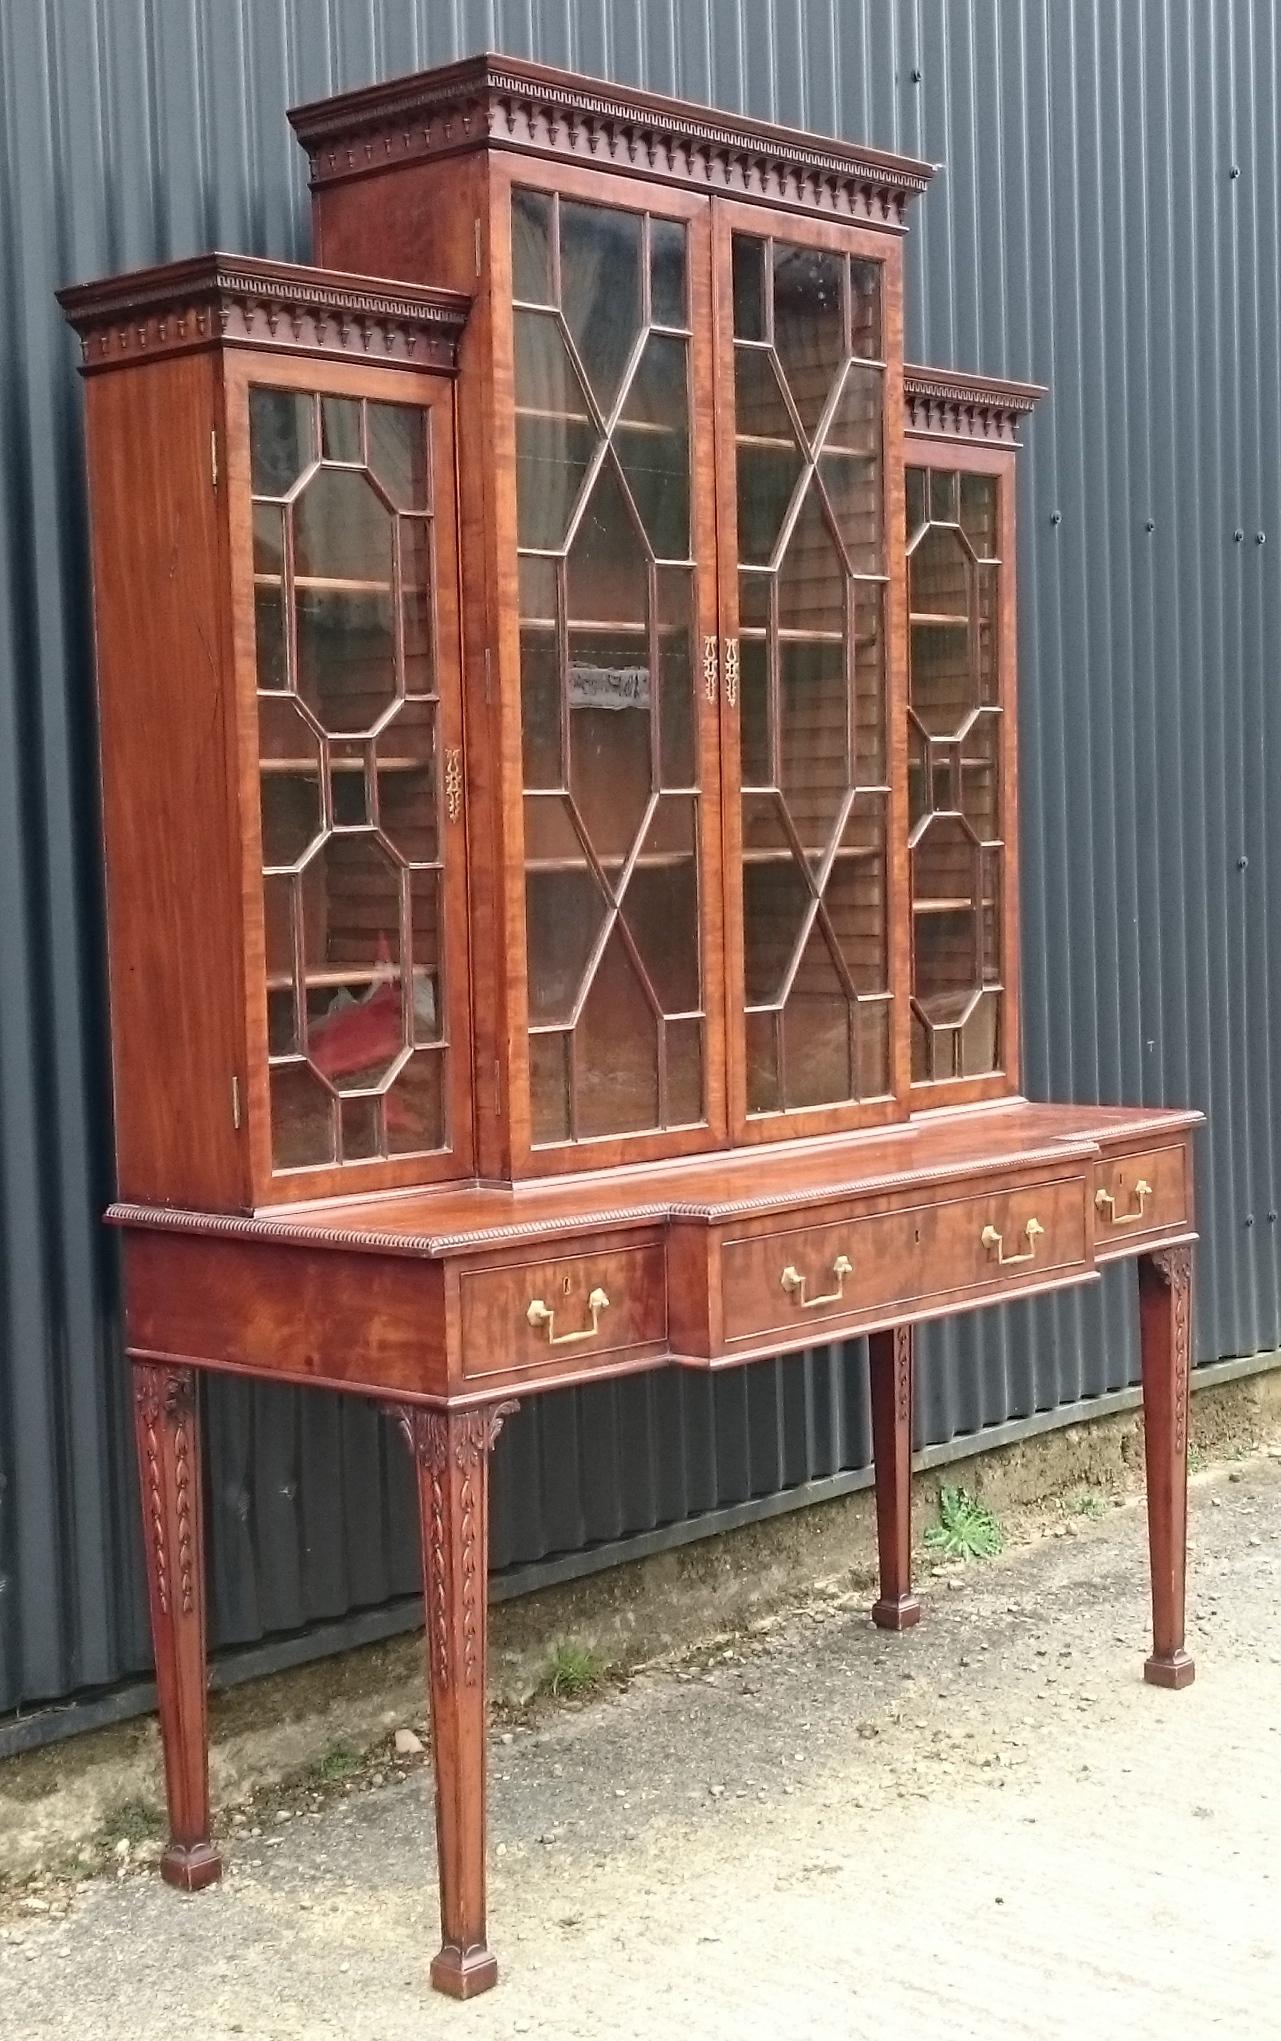 Antique secretaire or secretary bookcase, this is an especially fine piece of furniture made from fine quality figured fiddle back mahogany with mahogany lined drawers and a desk drawer with writing slope and sections for writing materials including